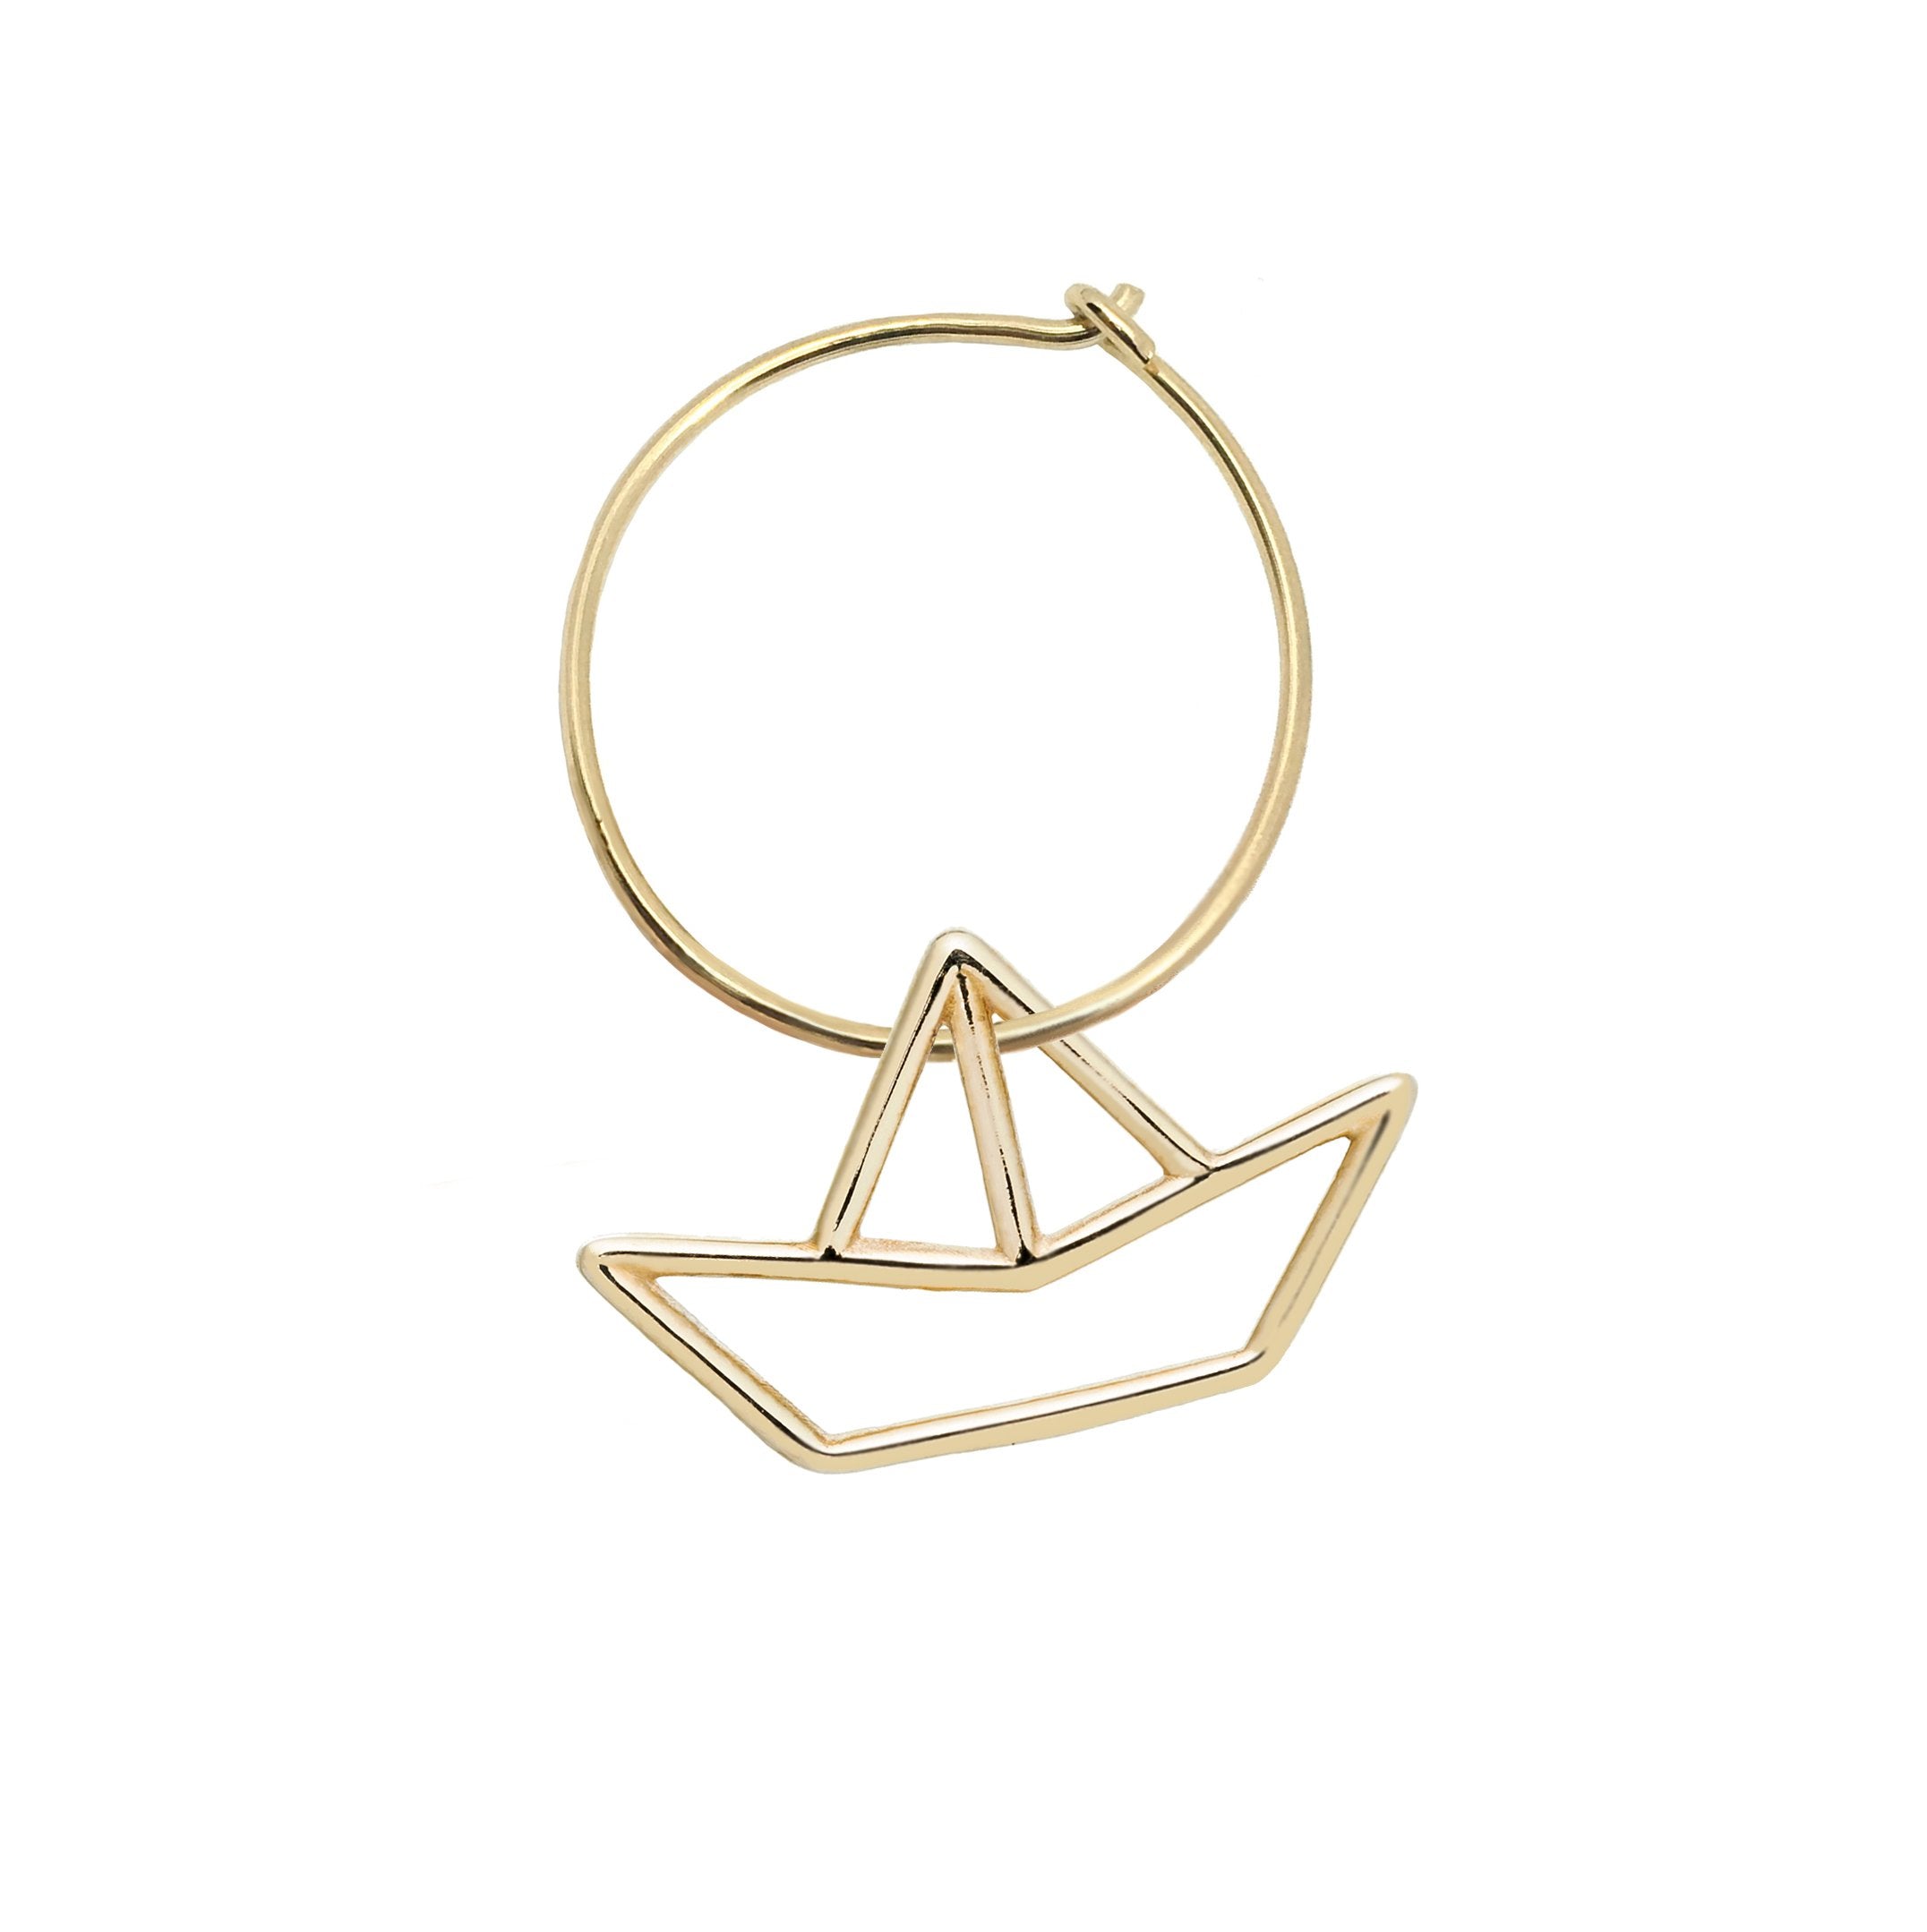 Gold hoop earring with little boat shaped pendant